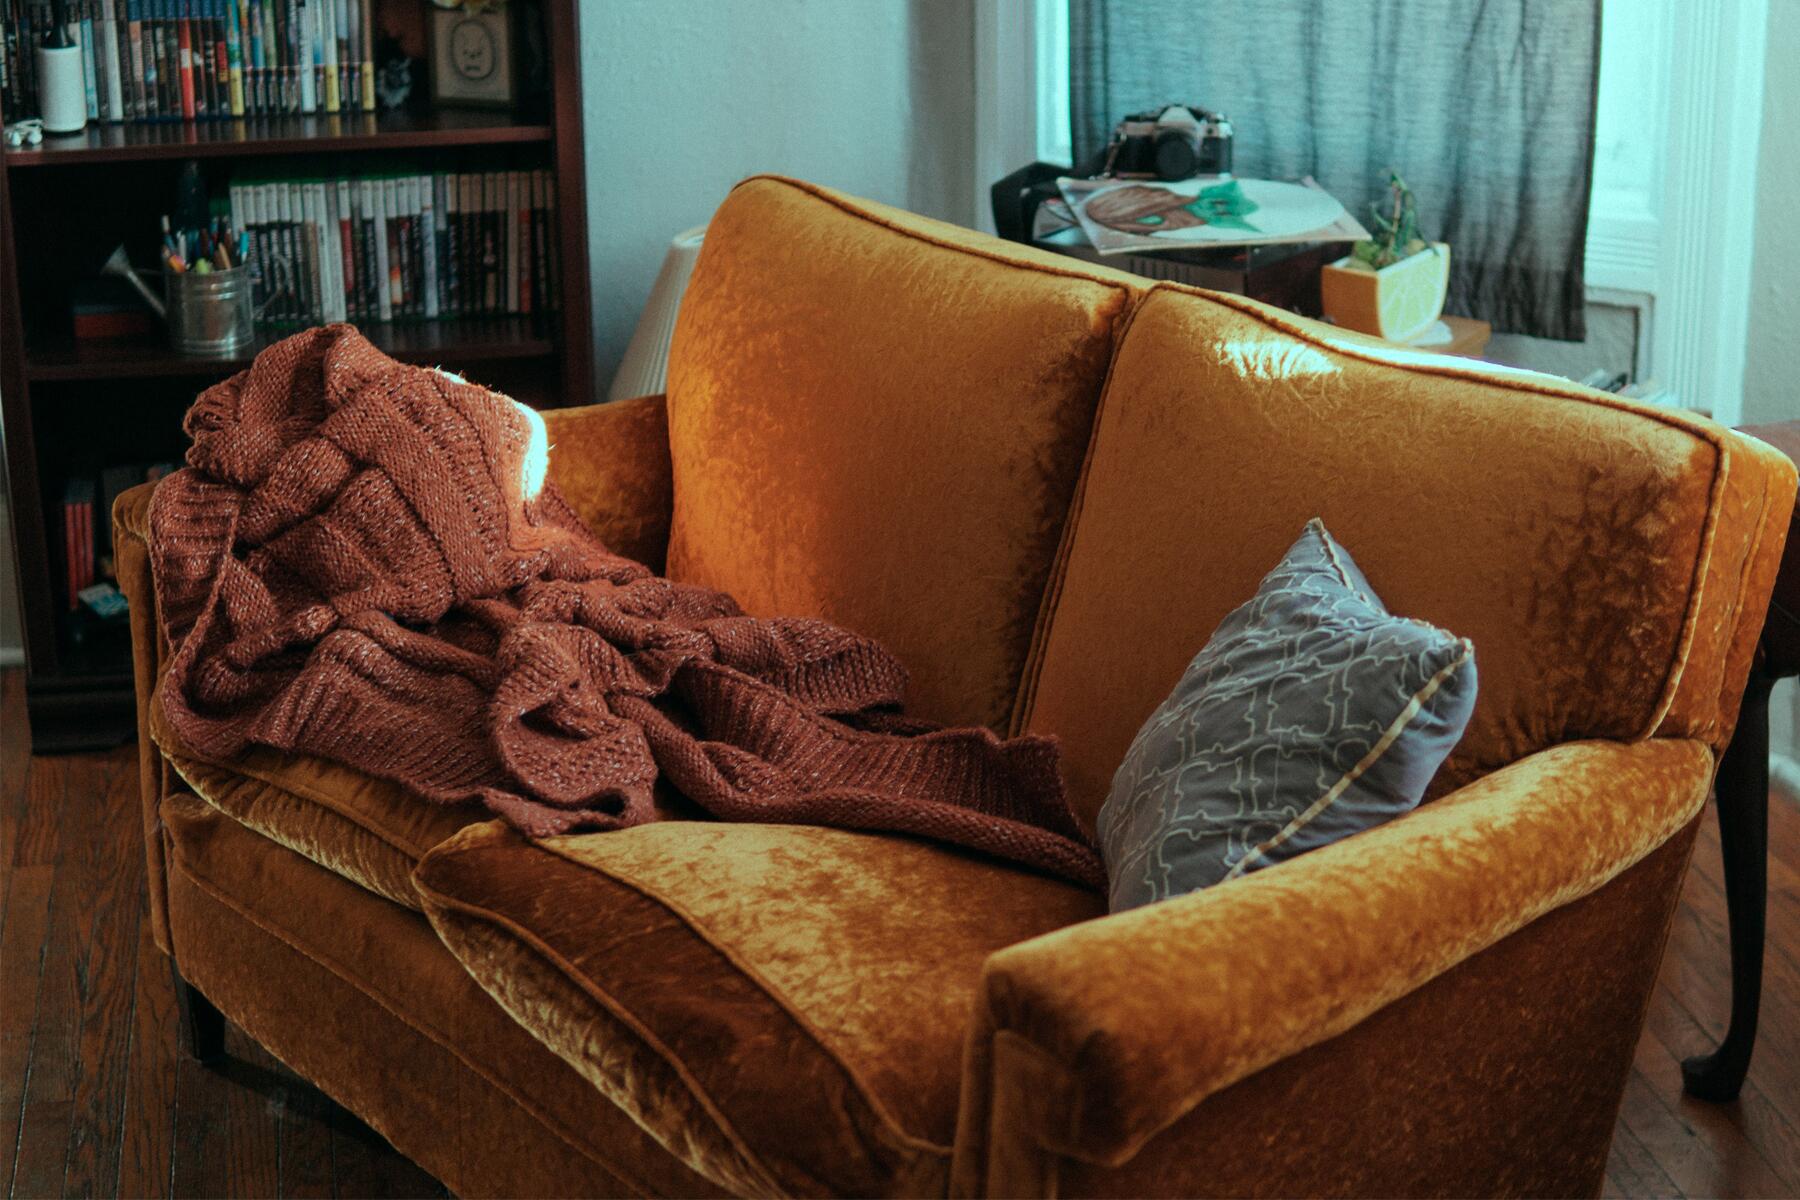 What I've Learned From Sleeping on Strangers' Couches